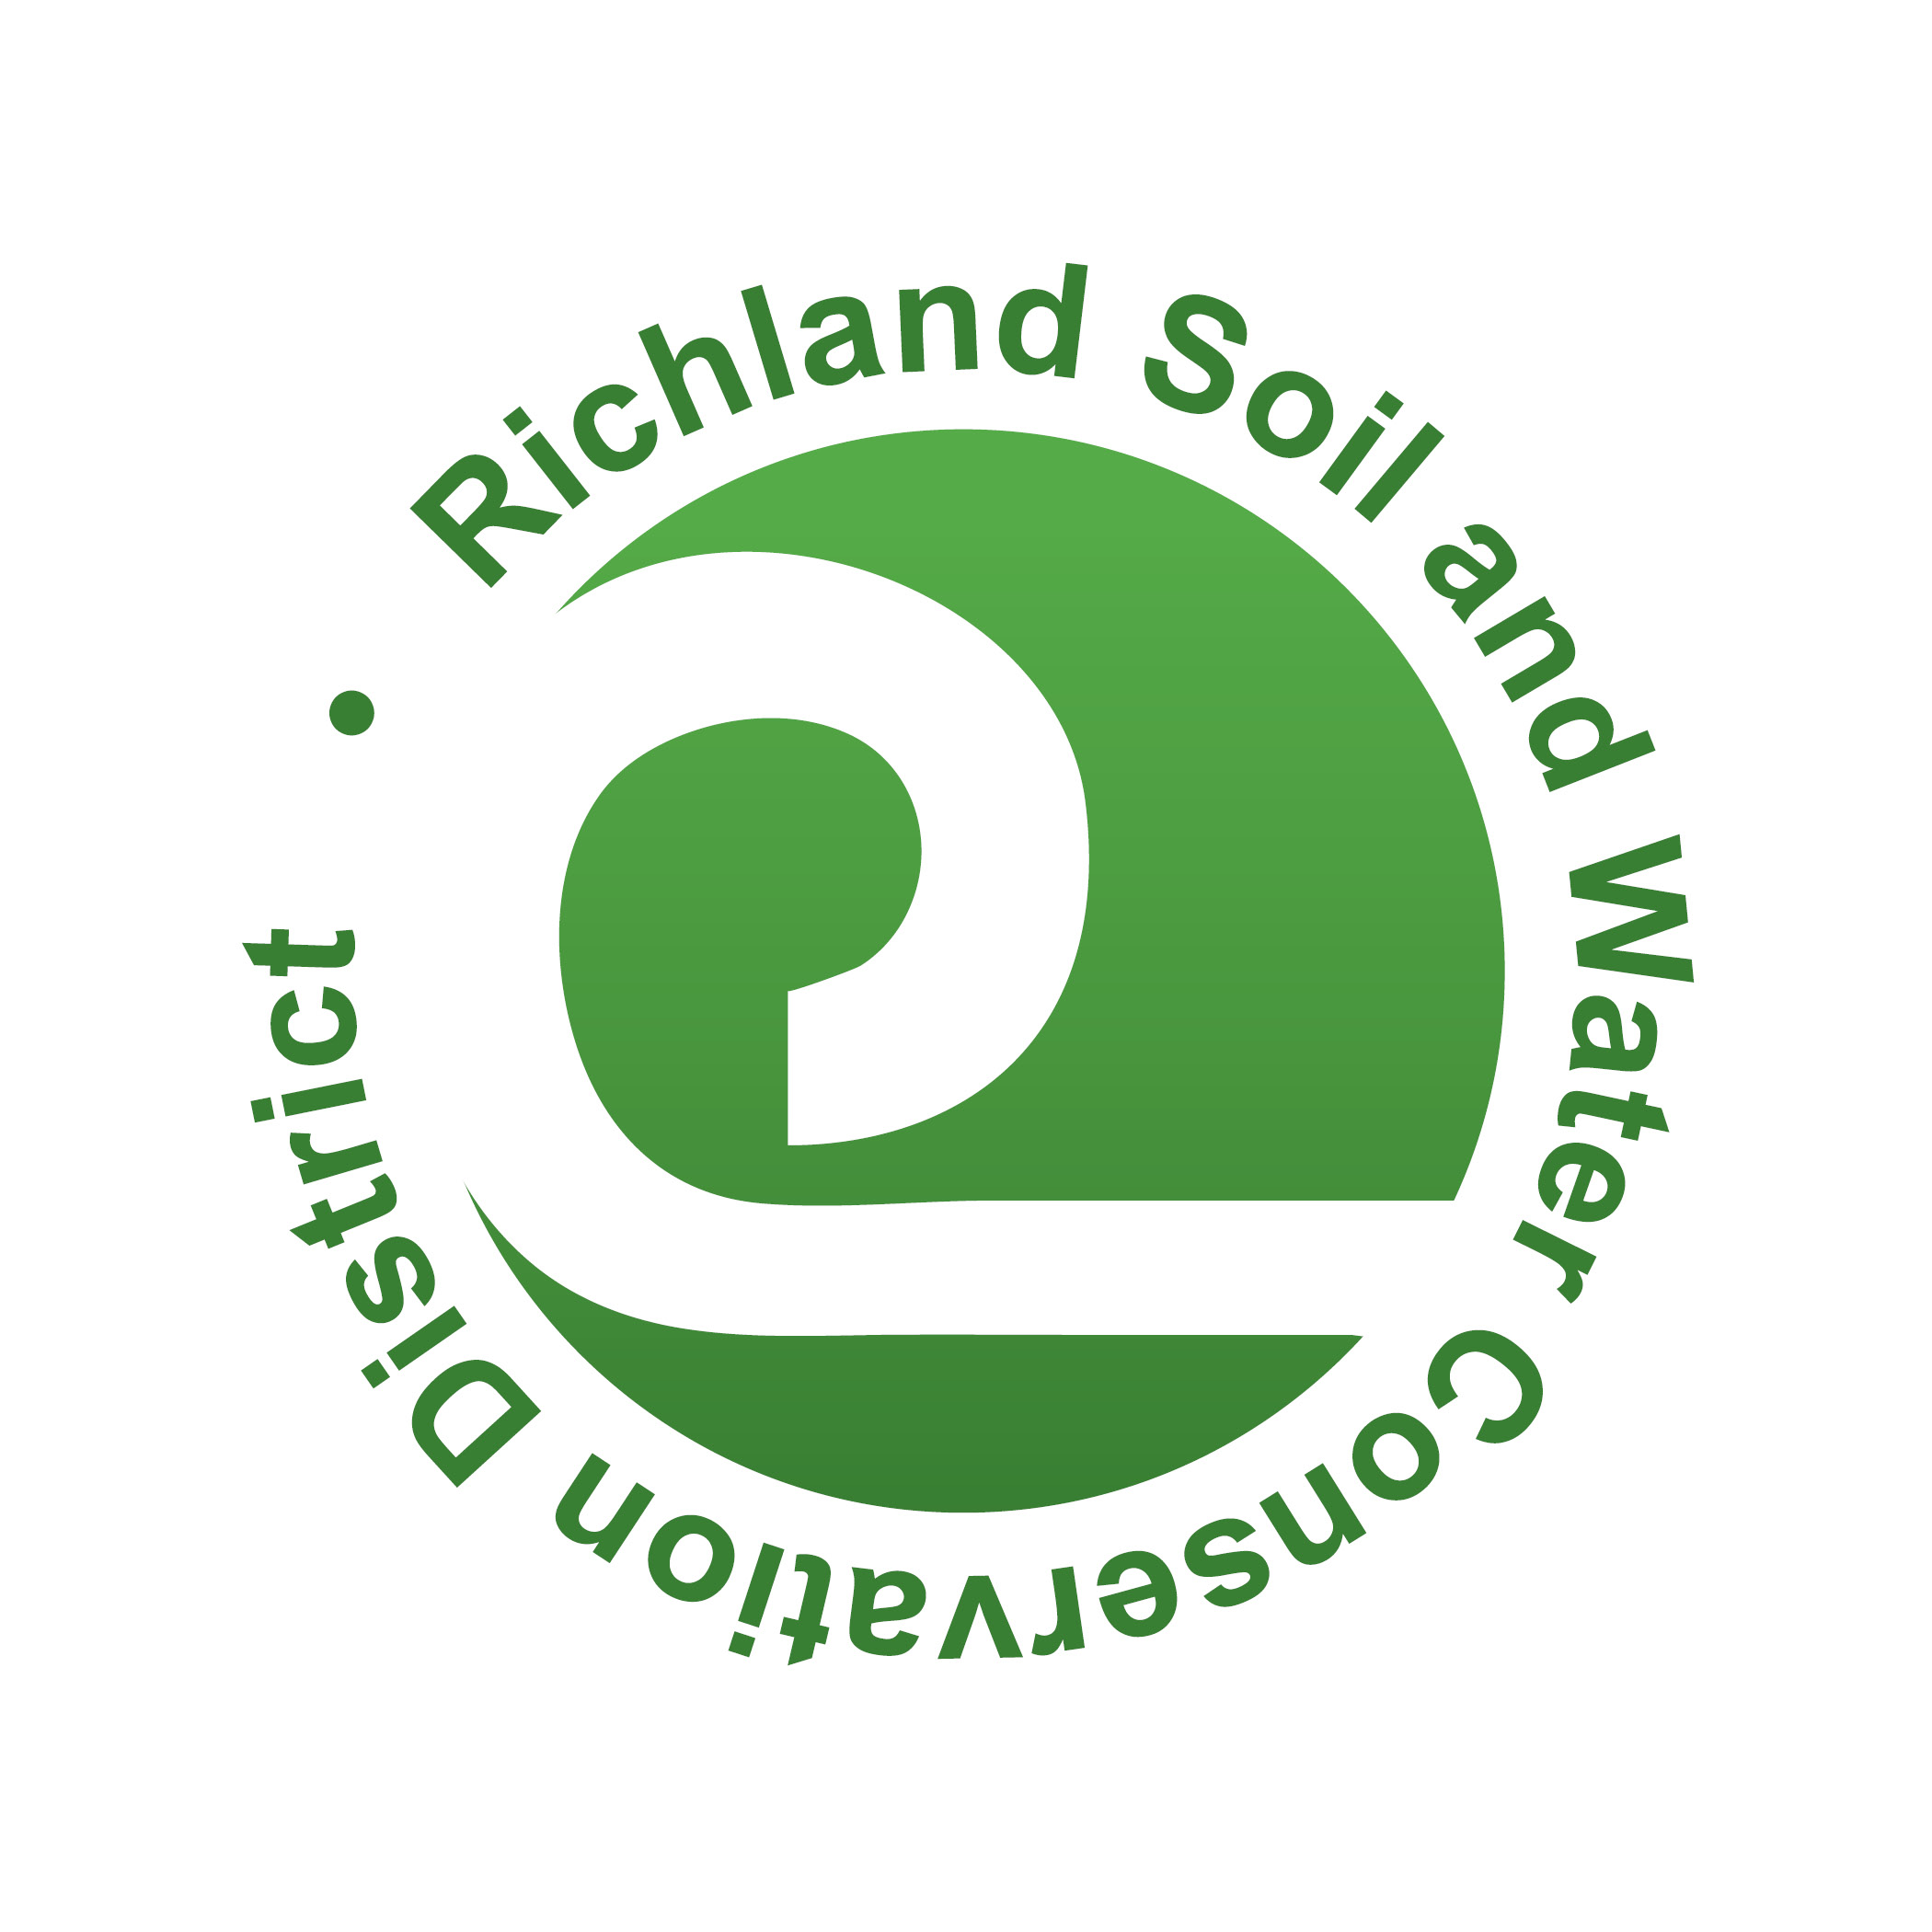 Richland Soil and Water Conservation District